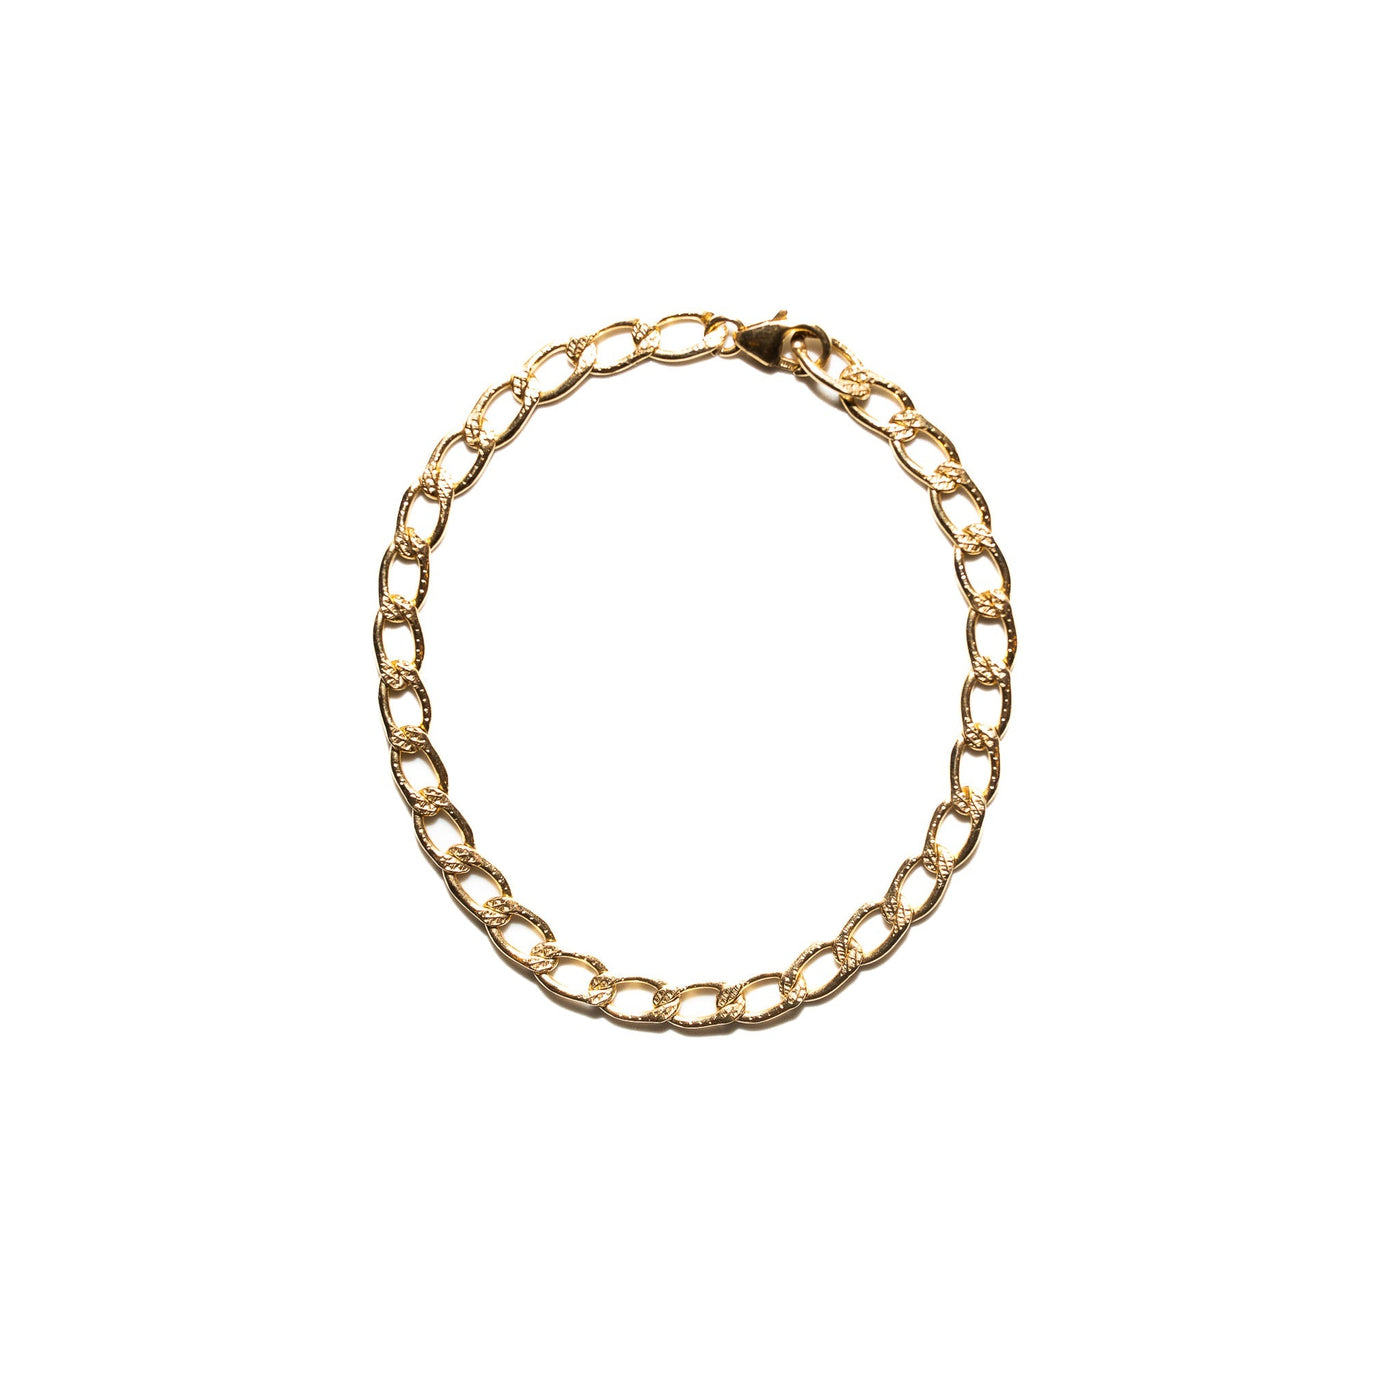 14K Yellow Gold Filled Paperclip Bracelet 02.